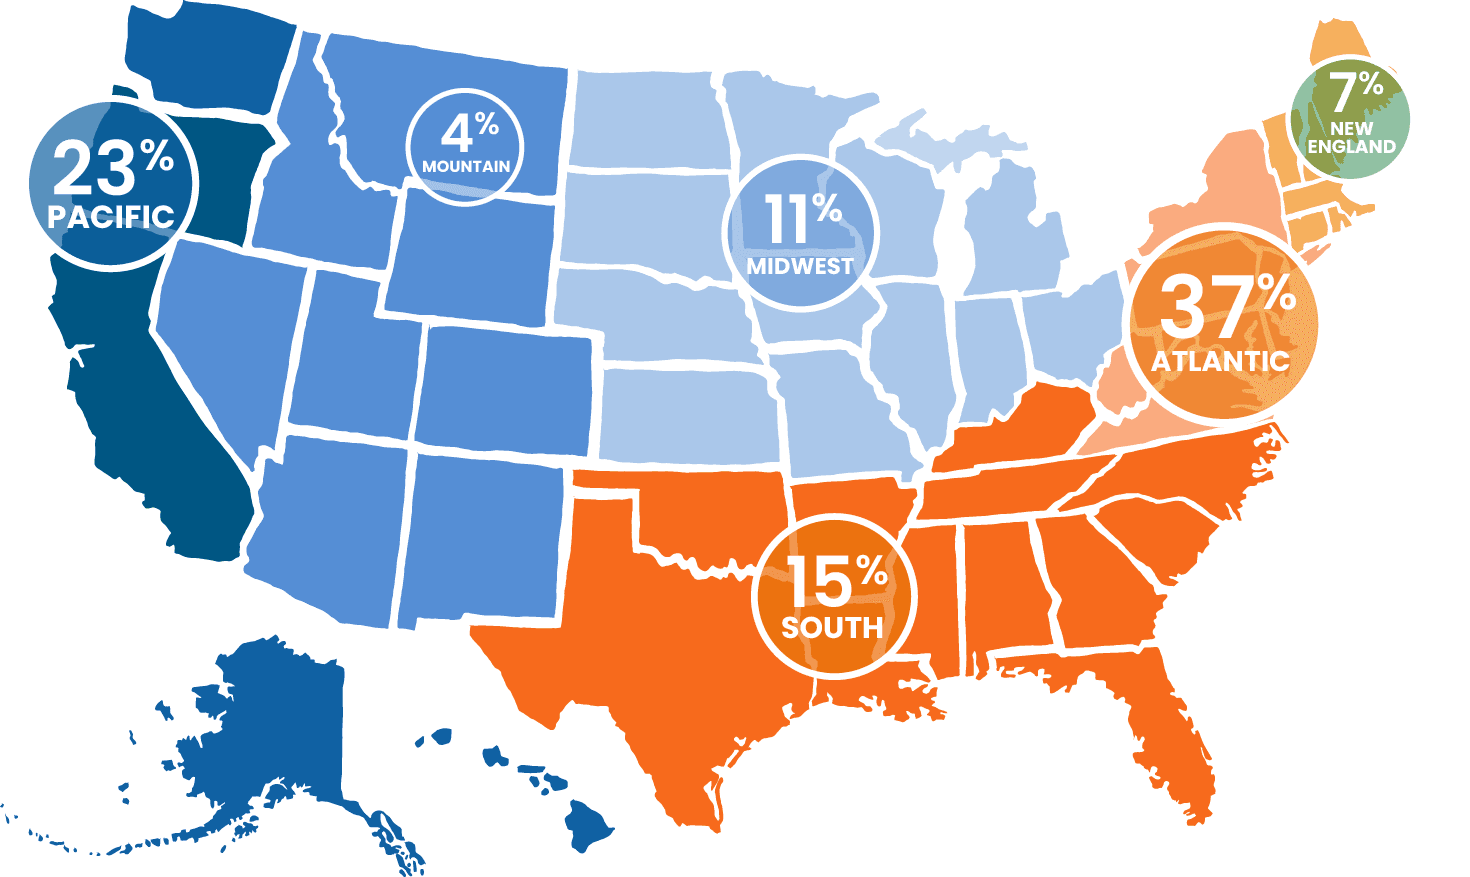 Map of the United States showing NTC Attendees by Region. 37% are from the Atlantic Region, 23% are from the Pacific Region, 15% are from the South, 11% from the Midwest, 7% from New England and 4% from the Mountain Region.